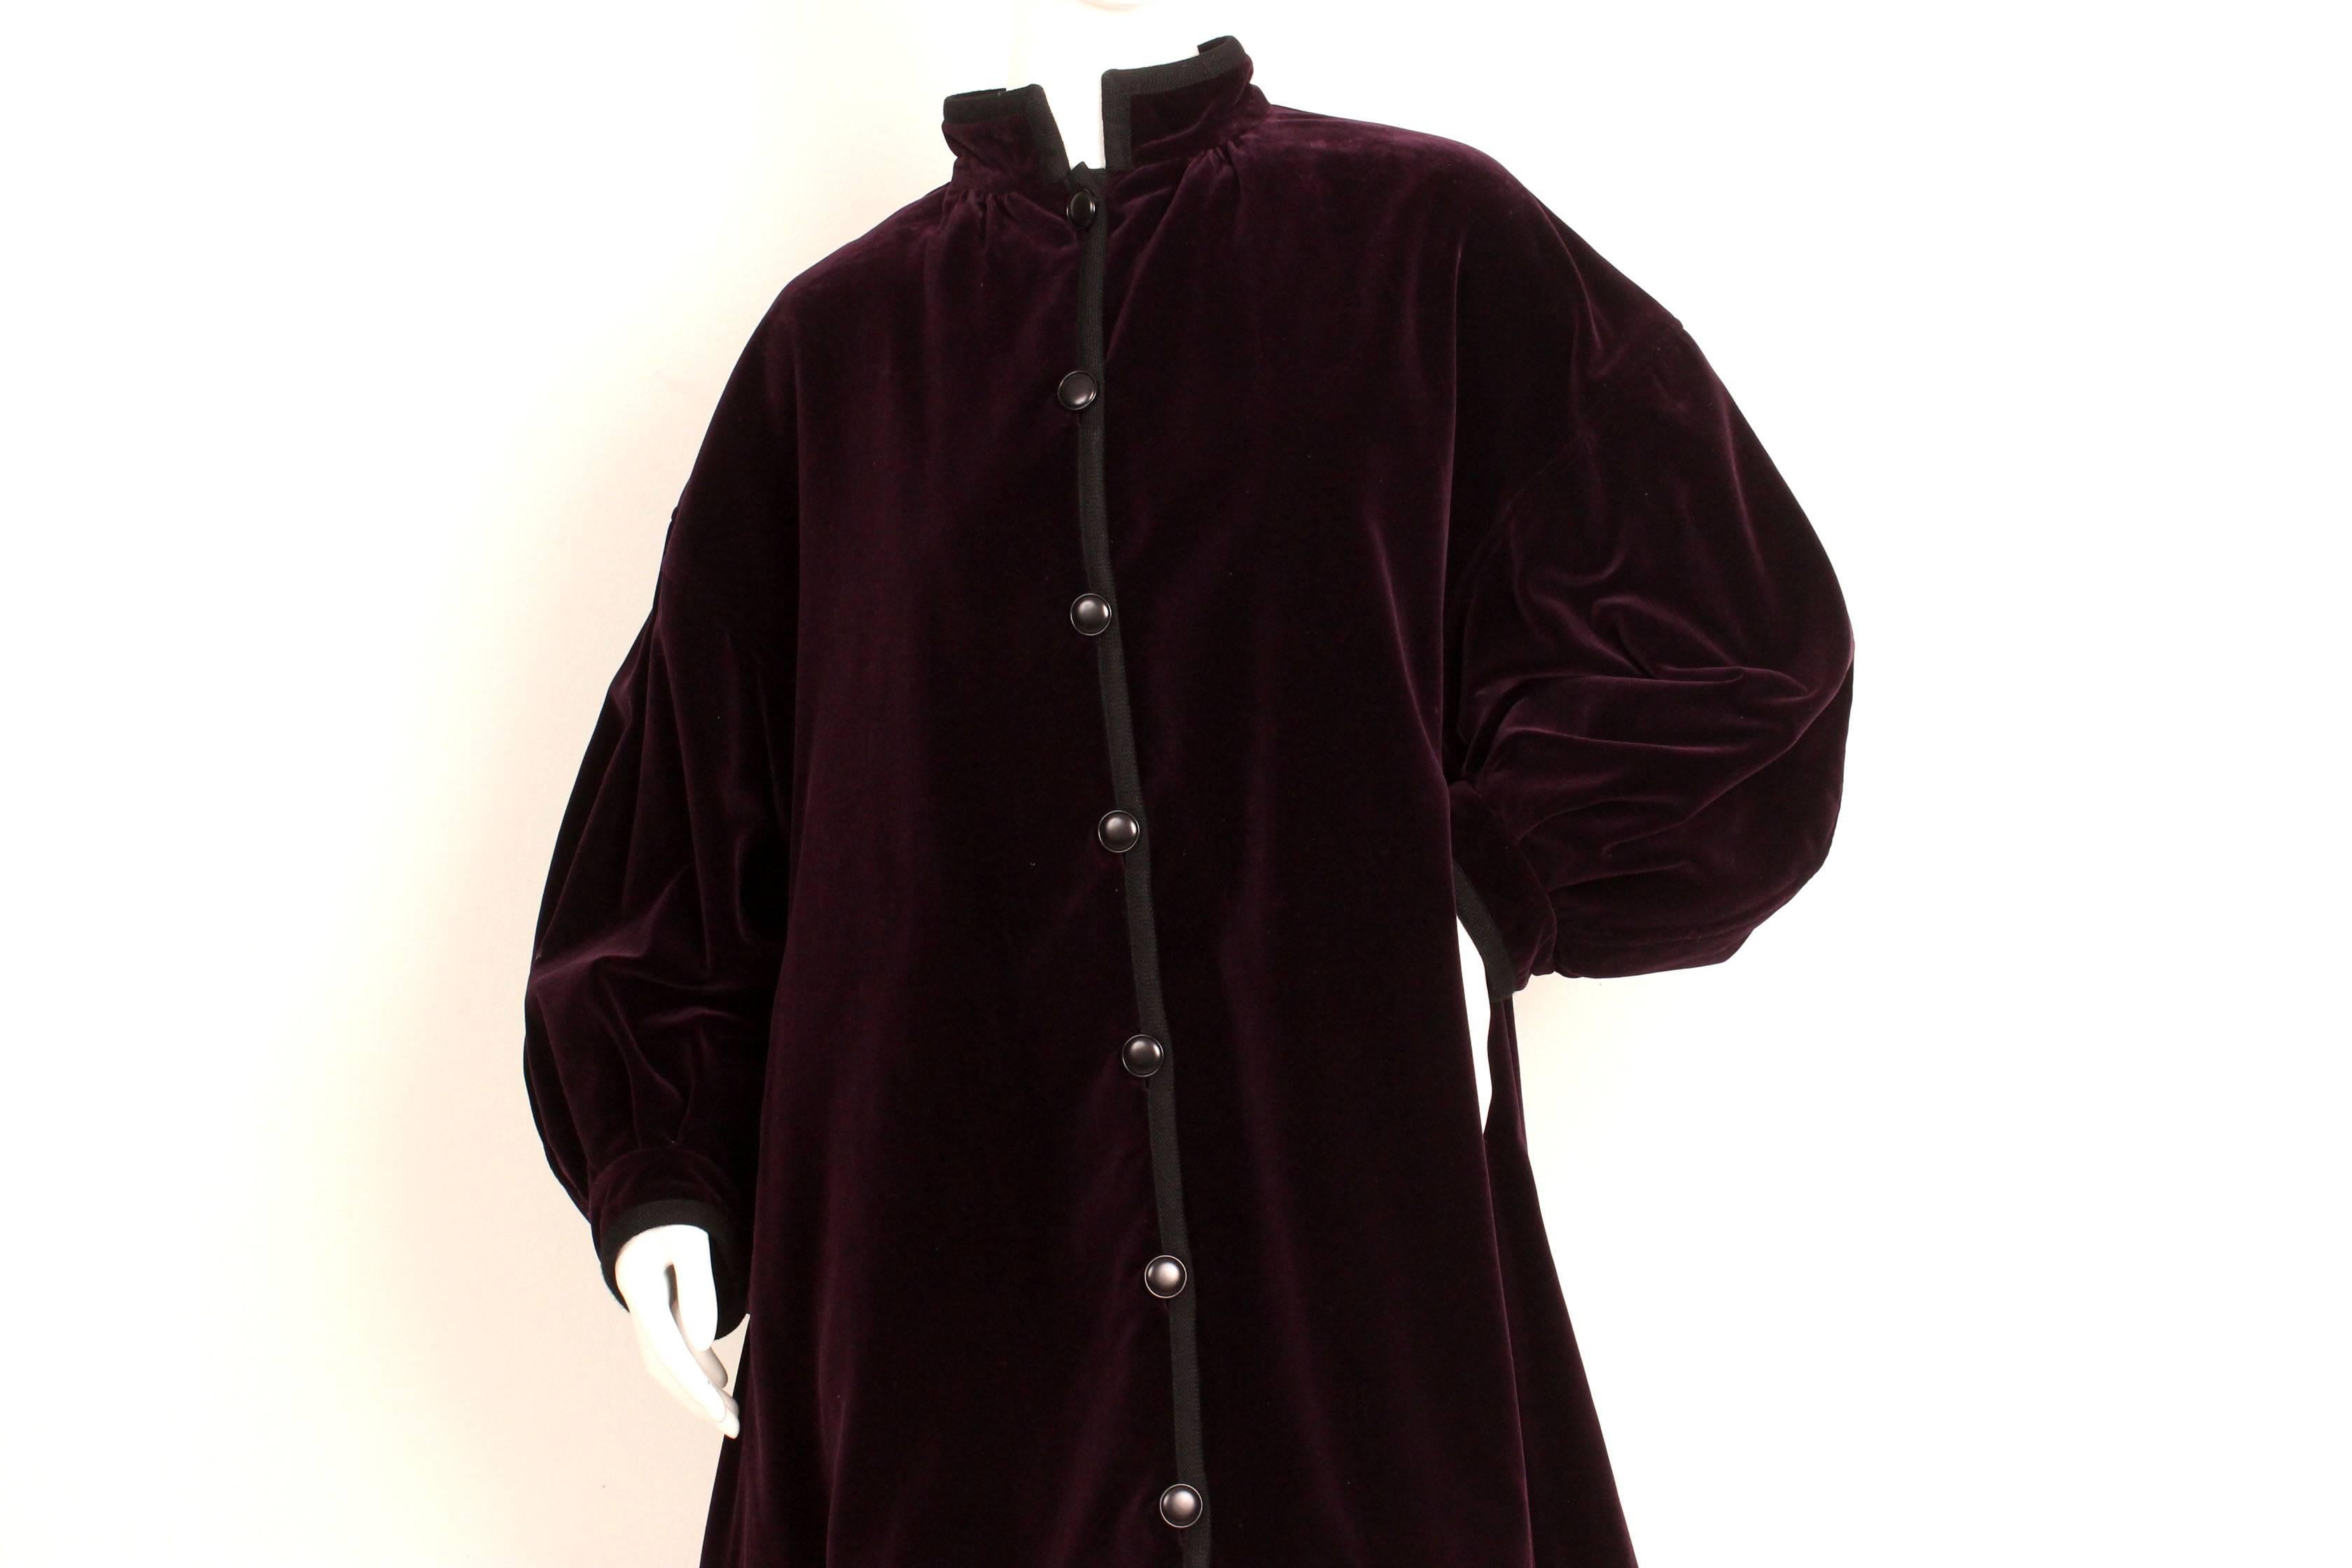 This jacket is a standout piece from Yves Saint Laurent's Rive Gauche 1977 collection.   The fabric is a lush velvet in a jewel tone deep purple.  The shape is trapeze like with beautiful wide exaggerated set in sleeves. Black buttons adorns the